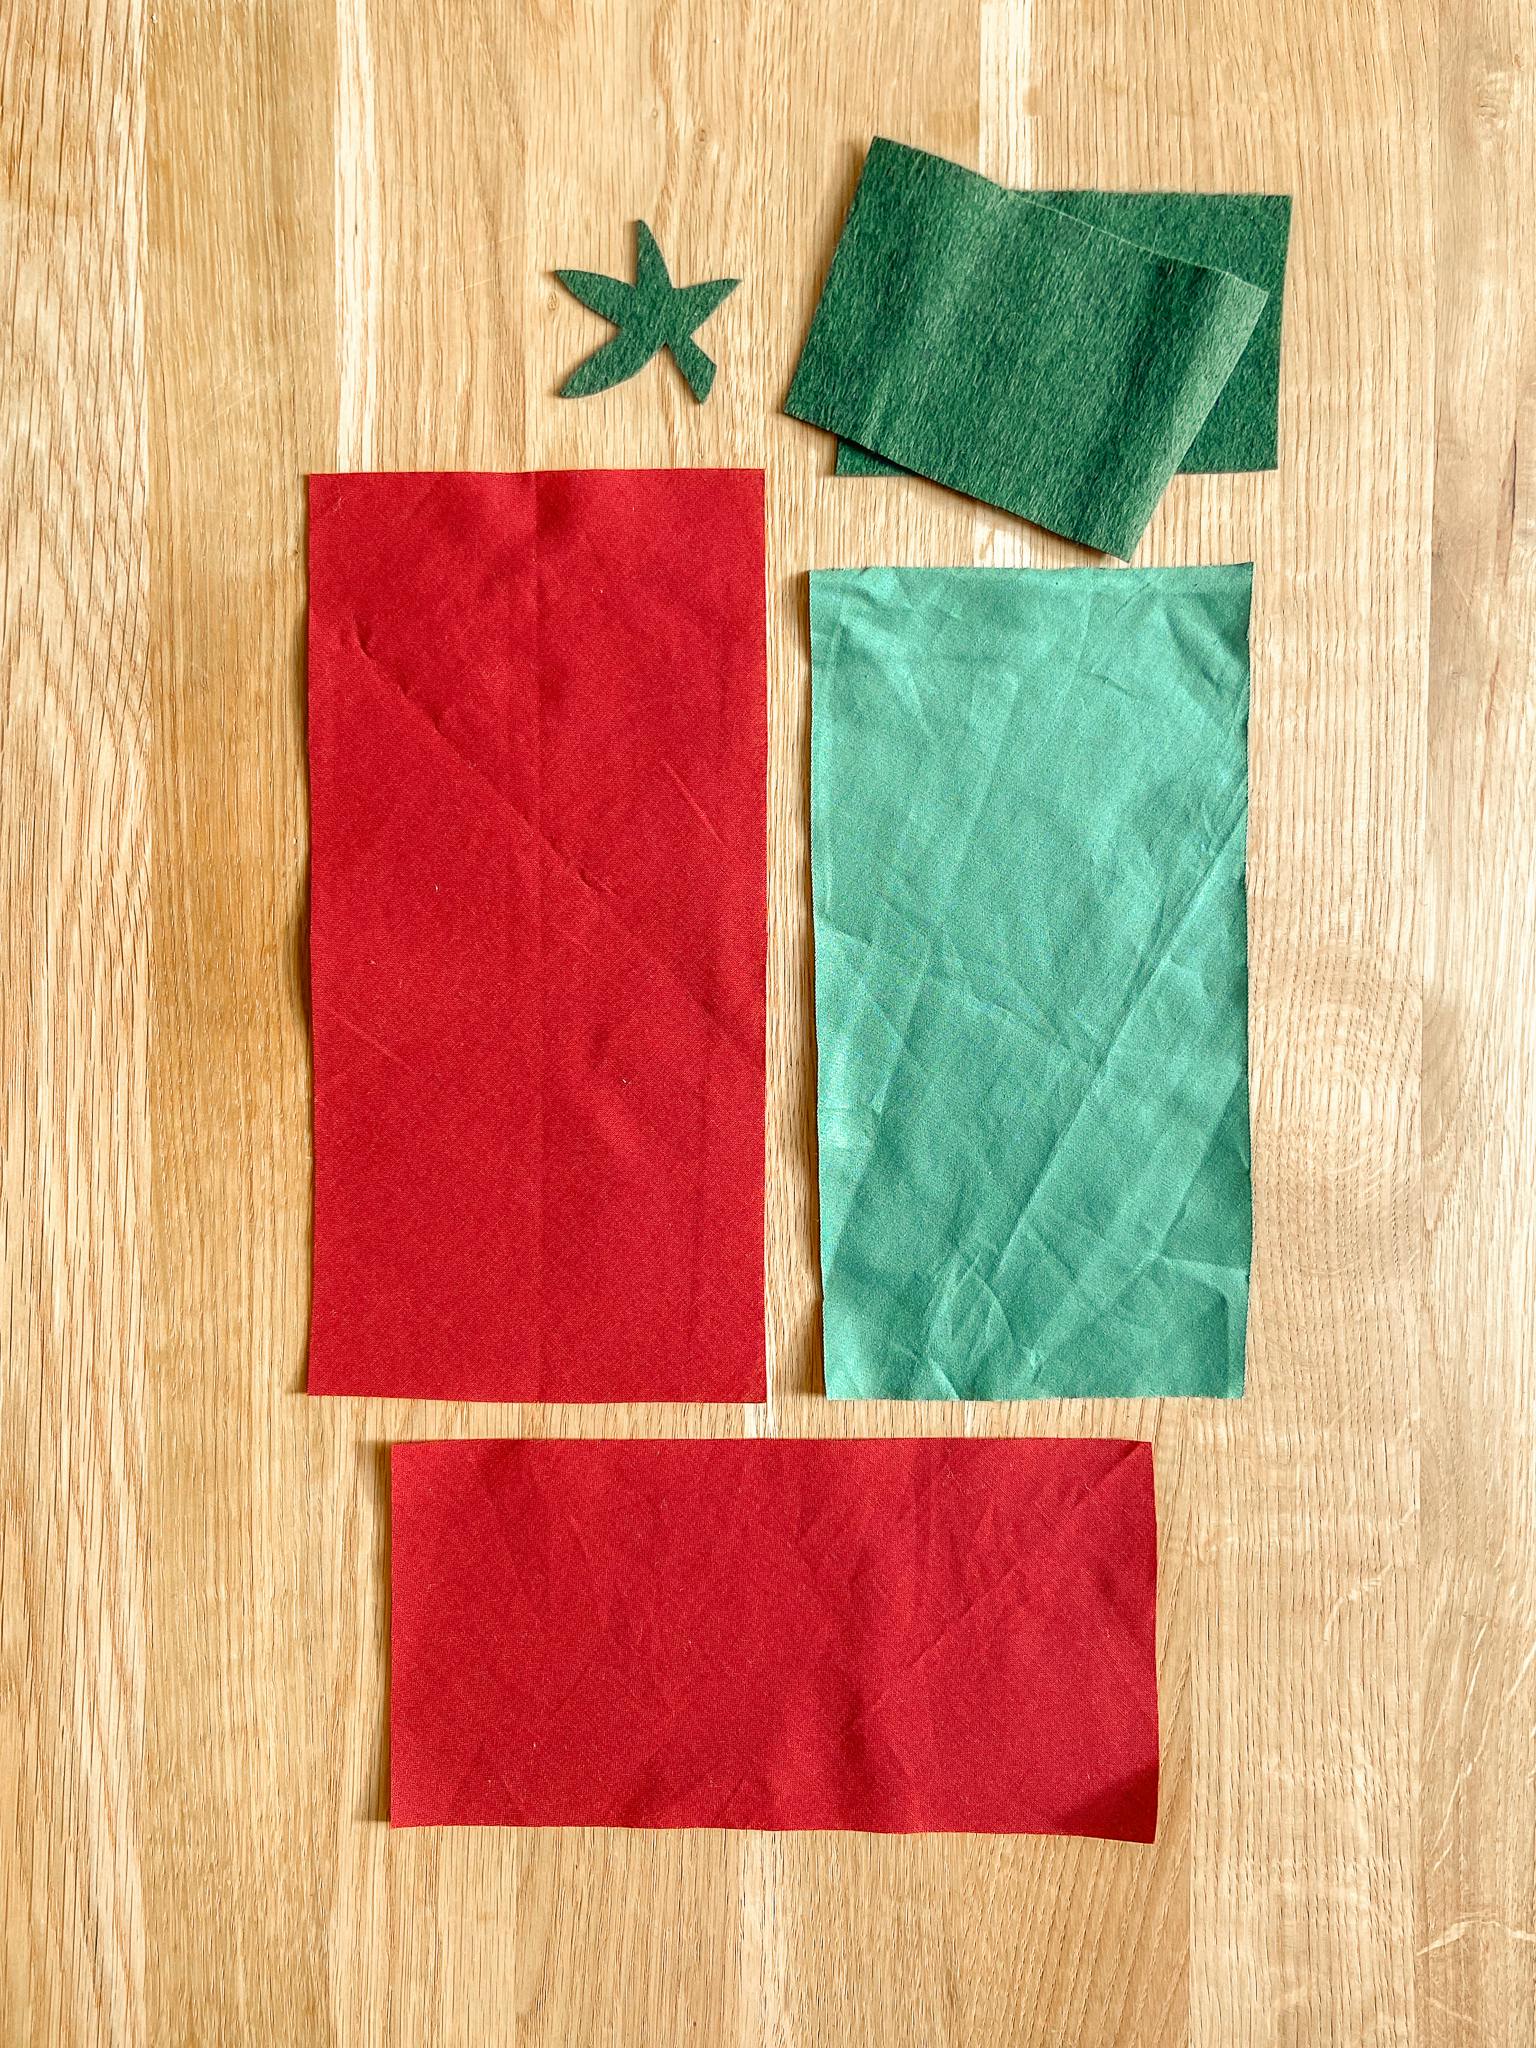  Rectangles cut out in green and red for fabric tomatoes